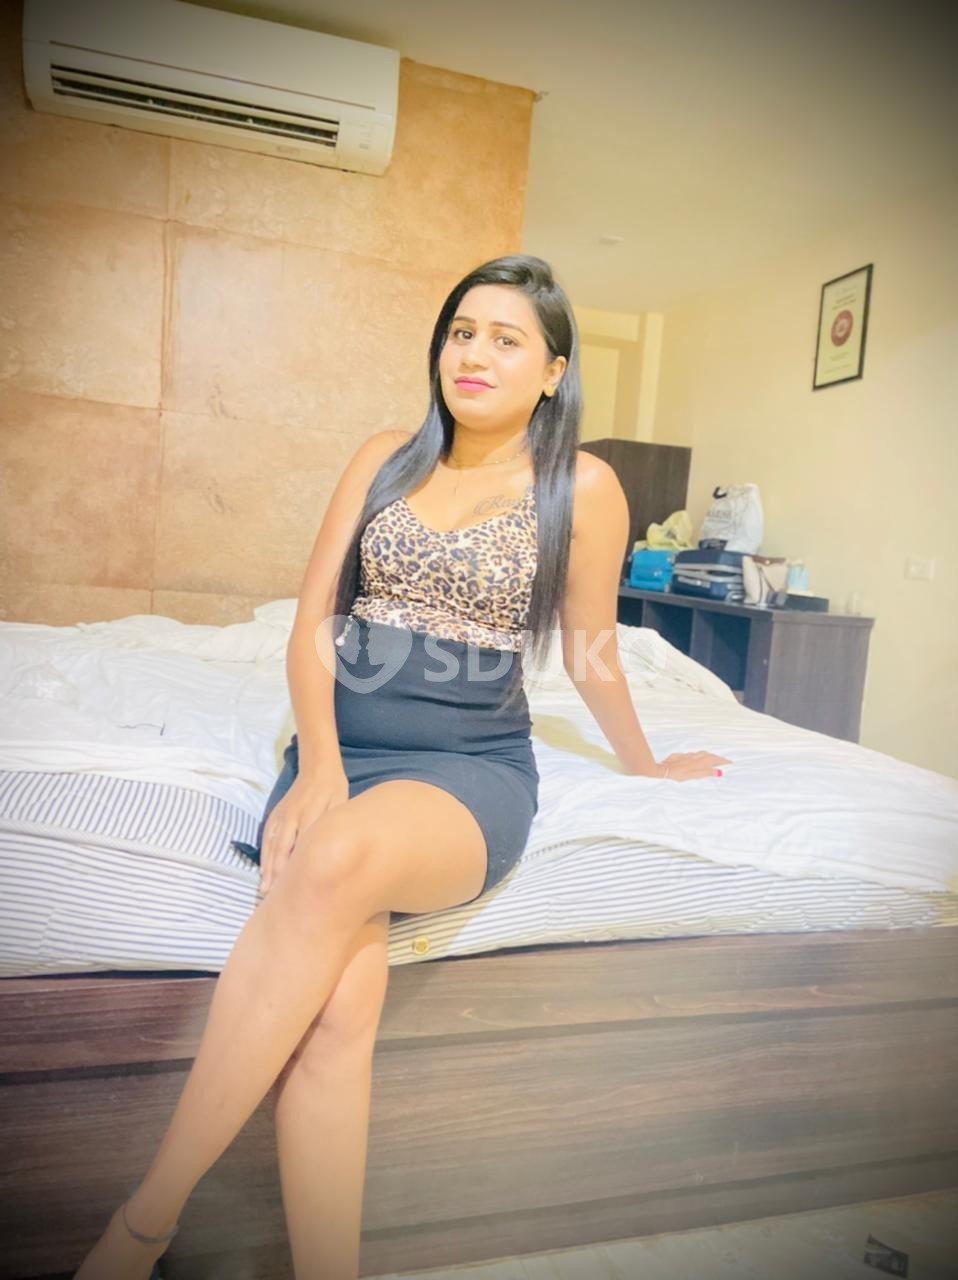 Vashi . 100% Guaranteed full safe and secure Today low price College girl Now book and  Injoy service. Vip